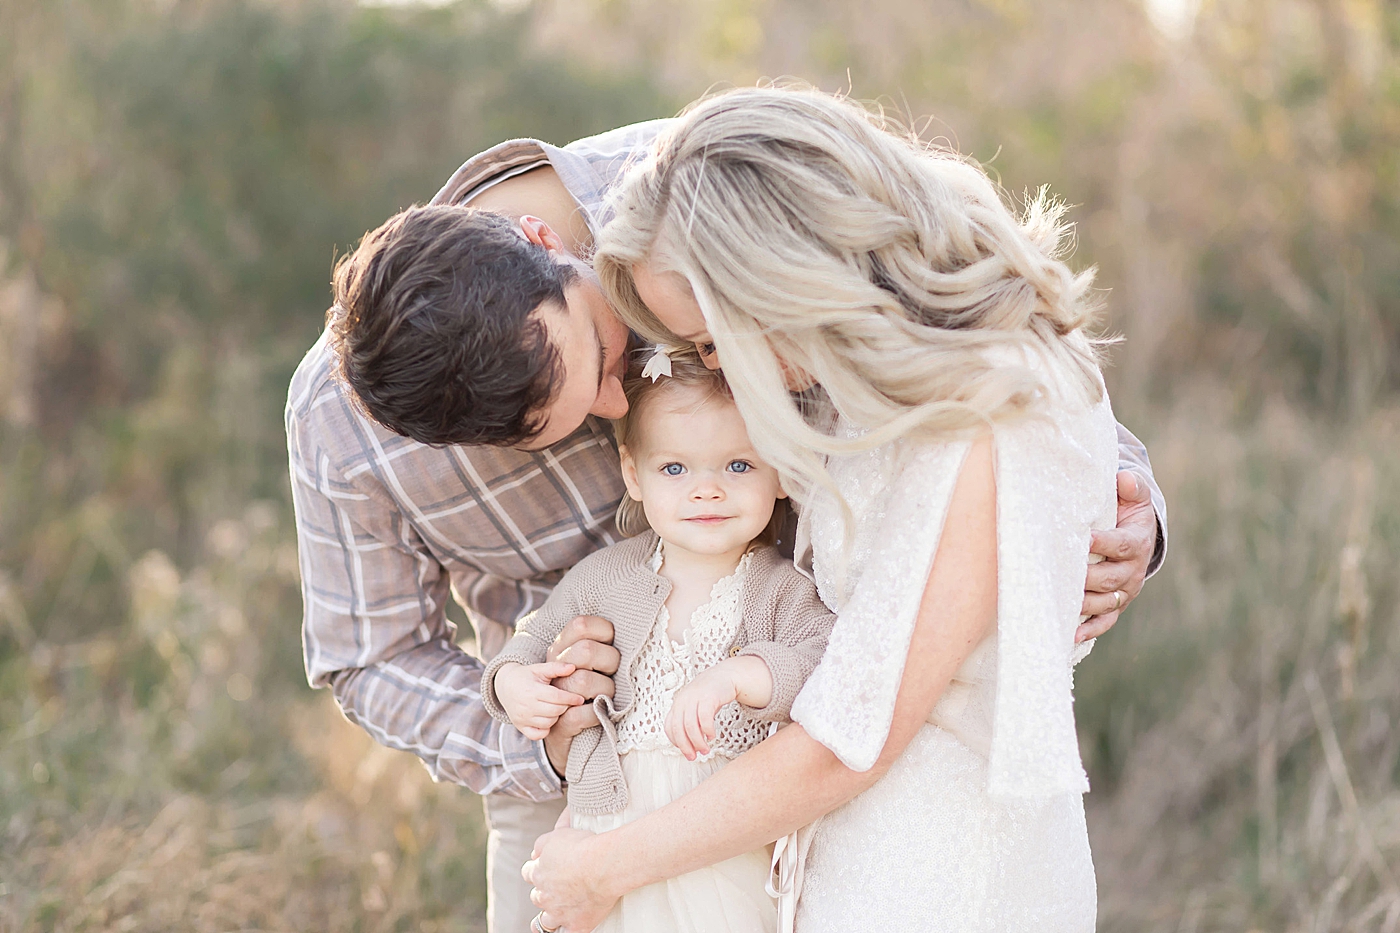 Outdoor family session to celebrate baby's first year with Fresh Light Photography.